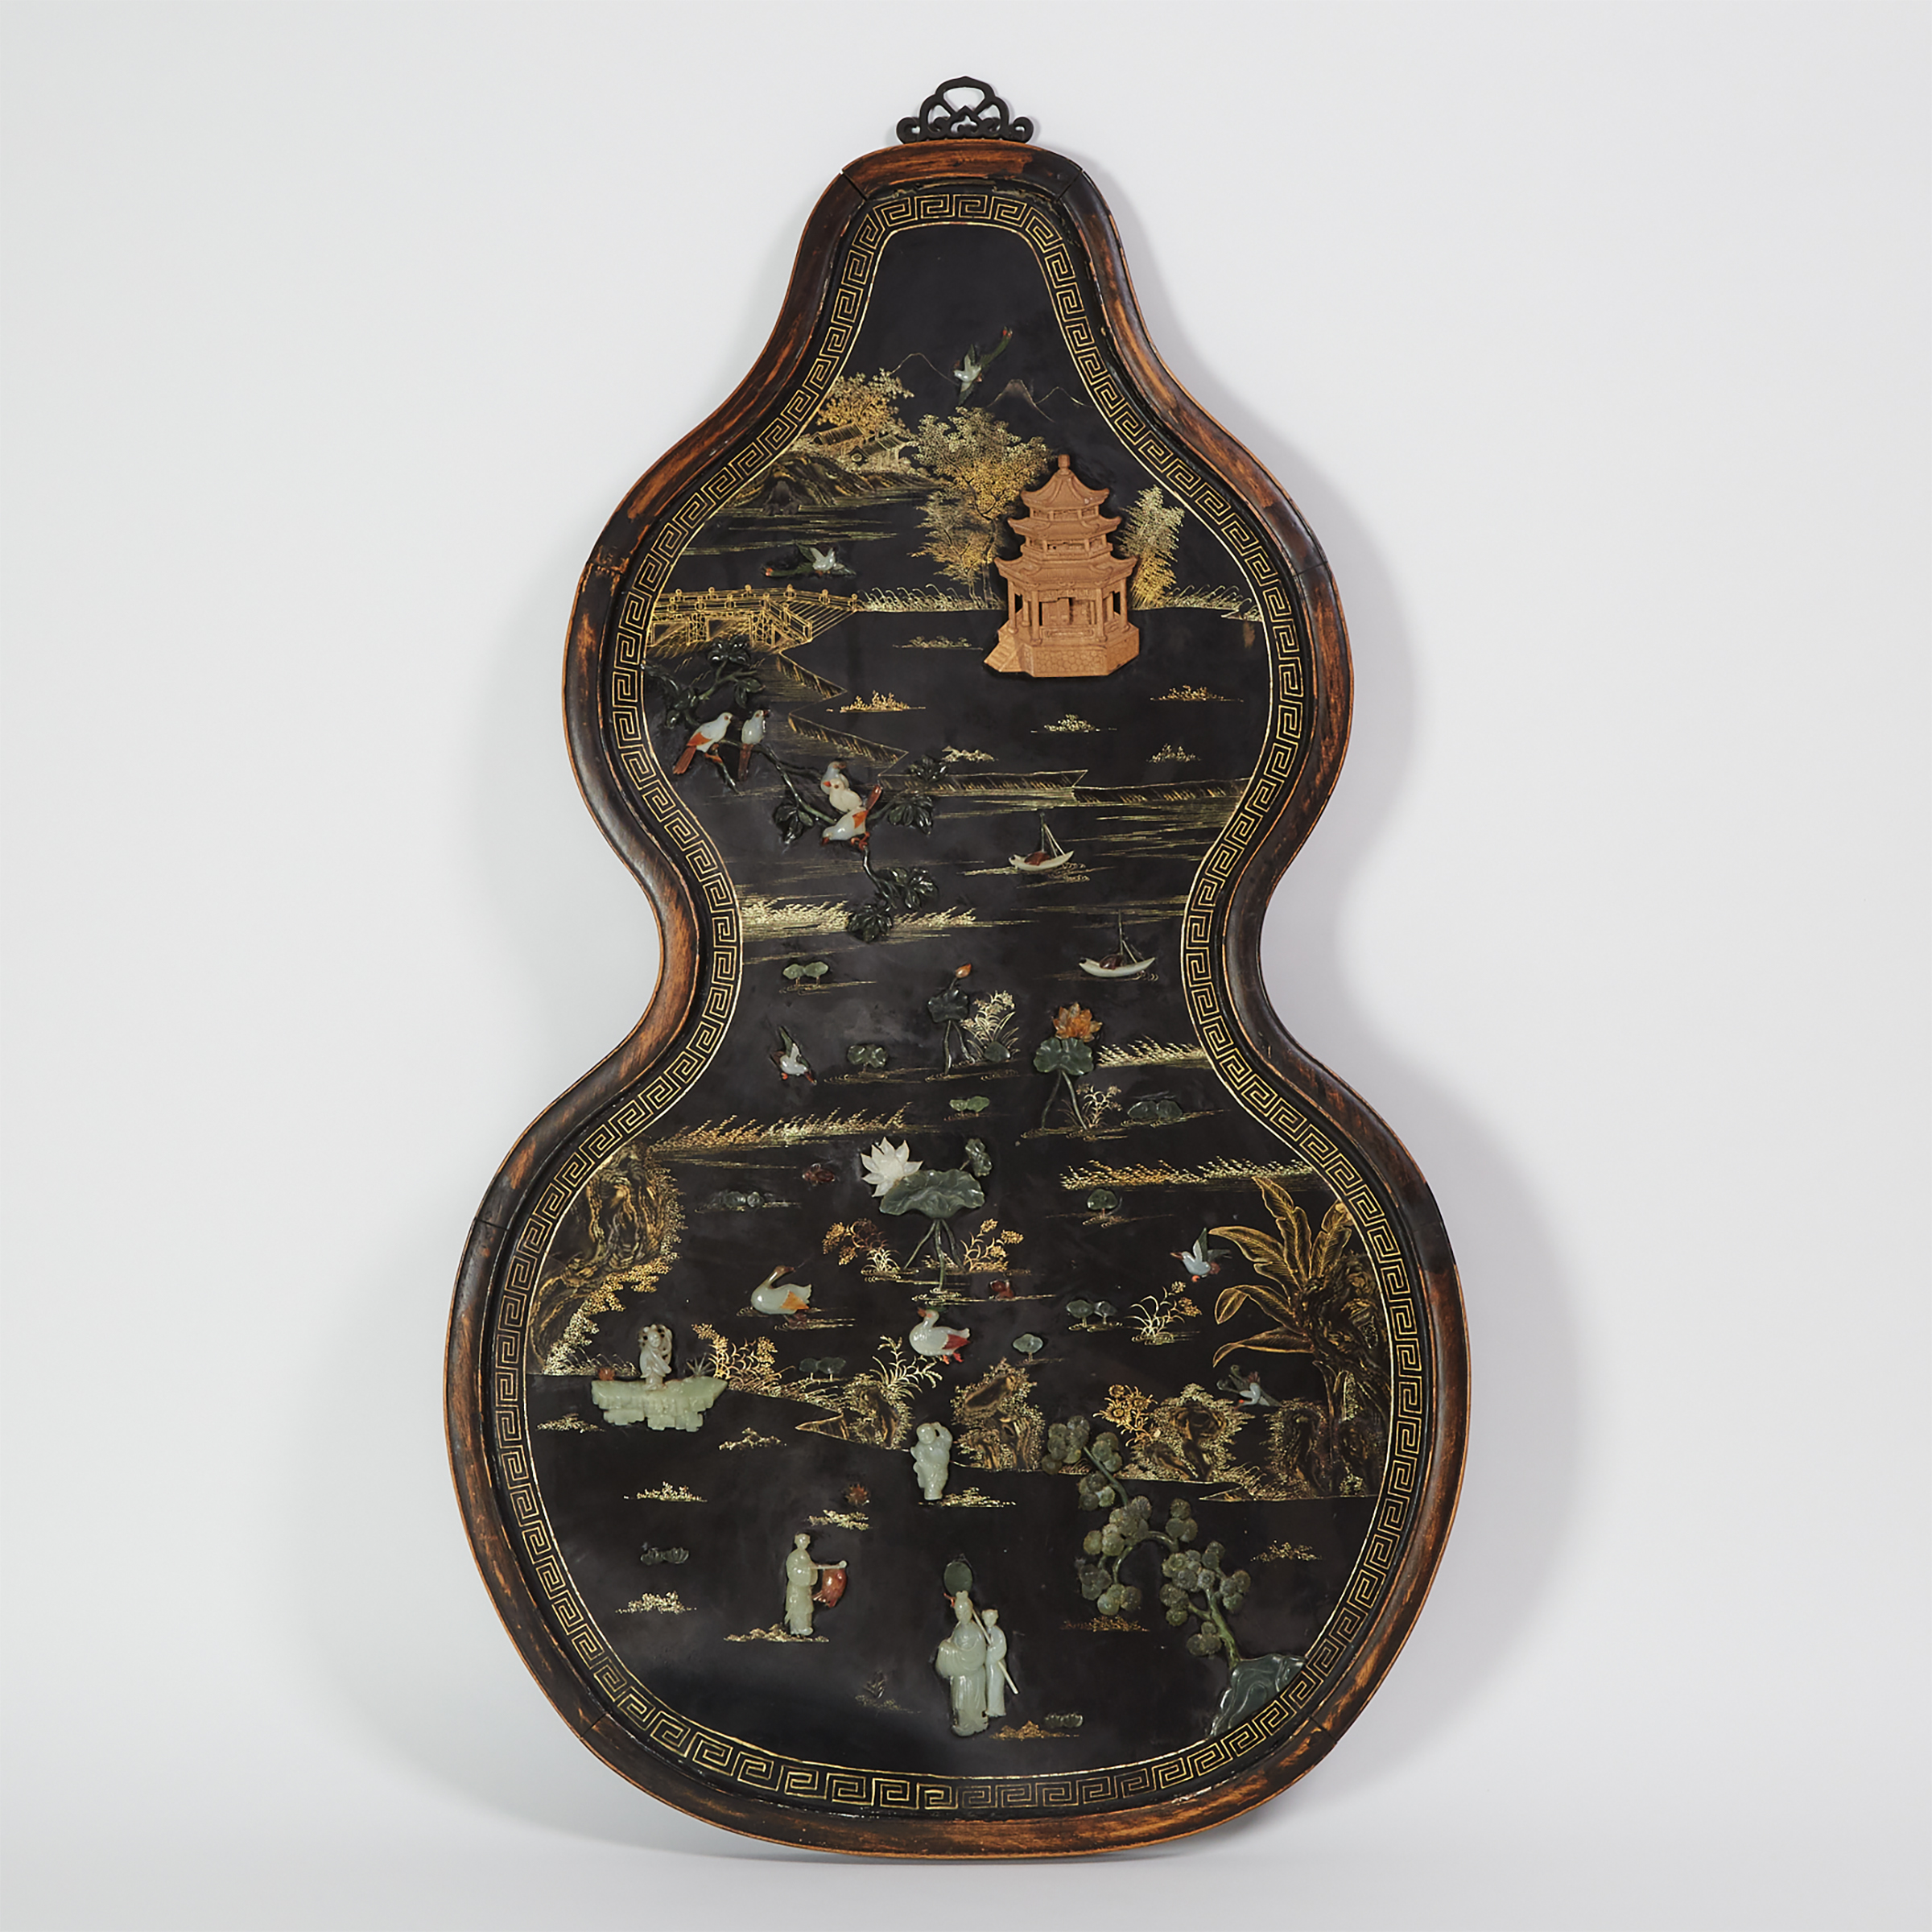 A Jade Inlaid and Gilt Decorated Black Lacquer Panel